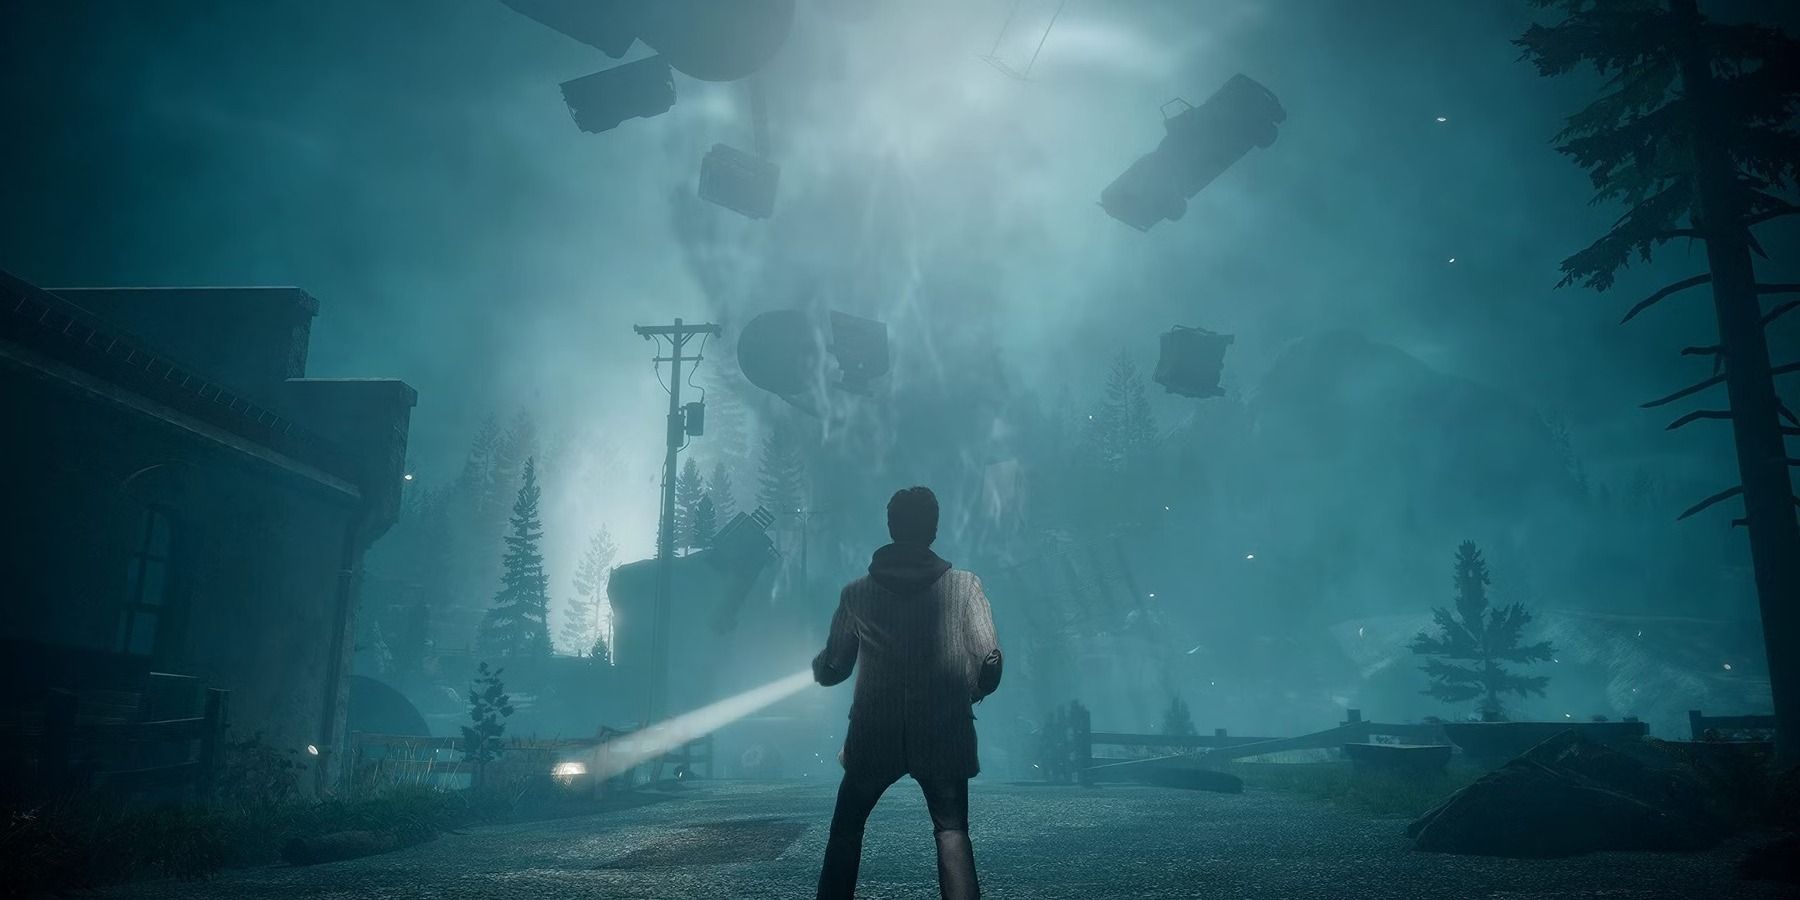 Alan Wake 2 Ending Explained: Is Alan Still in the Dark Place